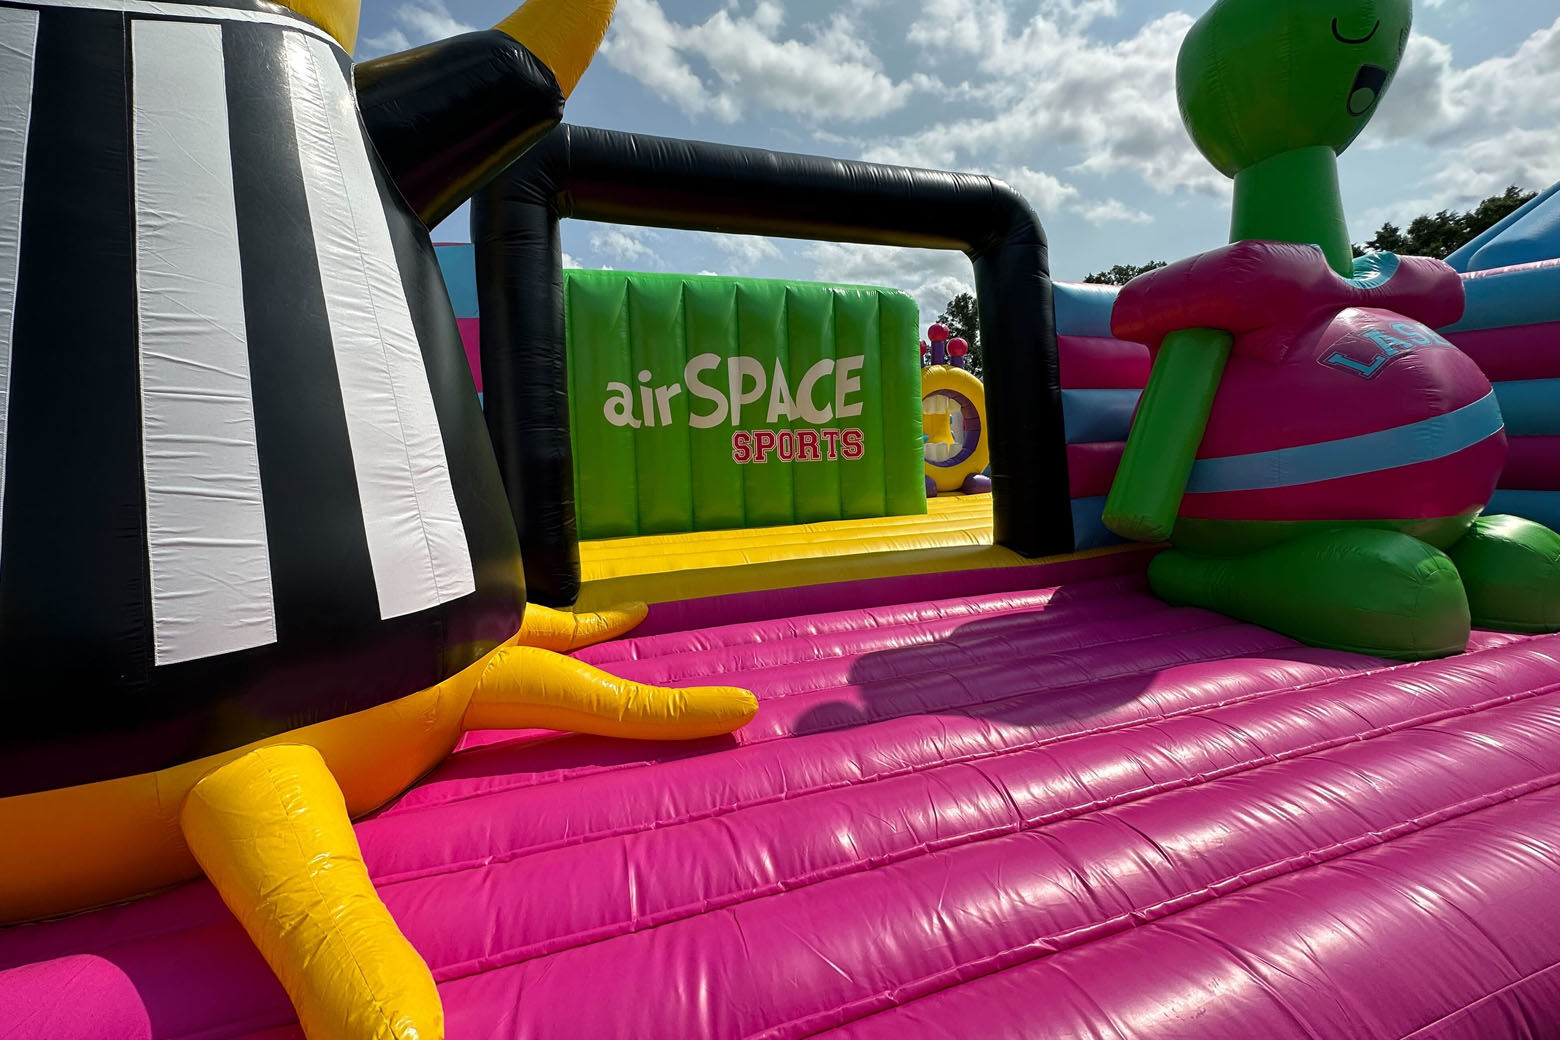 <p>In addition to the Bounce House, there&#8217;s a newly added Sport Slam featuring a customized, inflatable sports arena and a 900-foot obstacle course called &#8220;The Giant.&#8221;</p>
